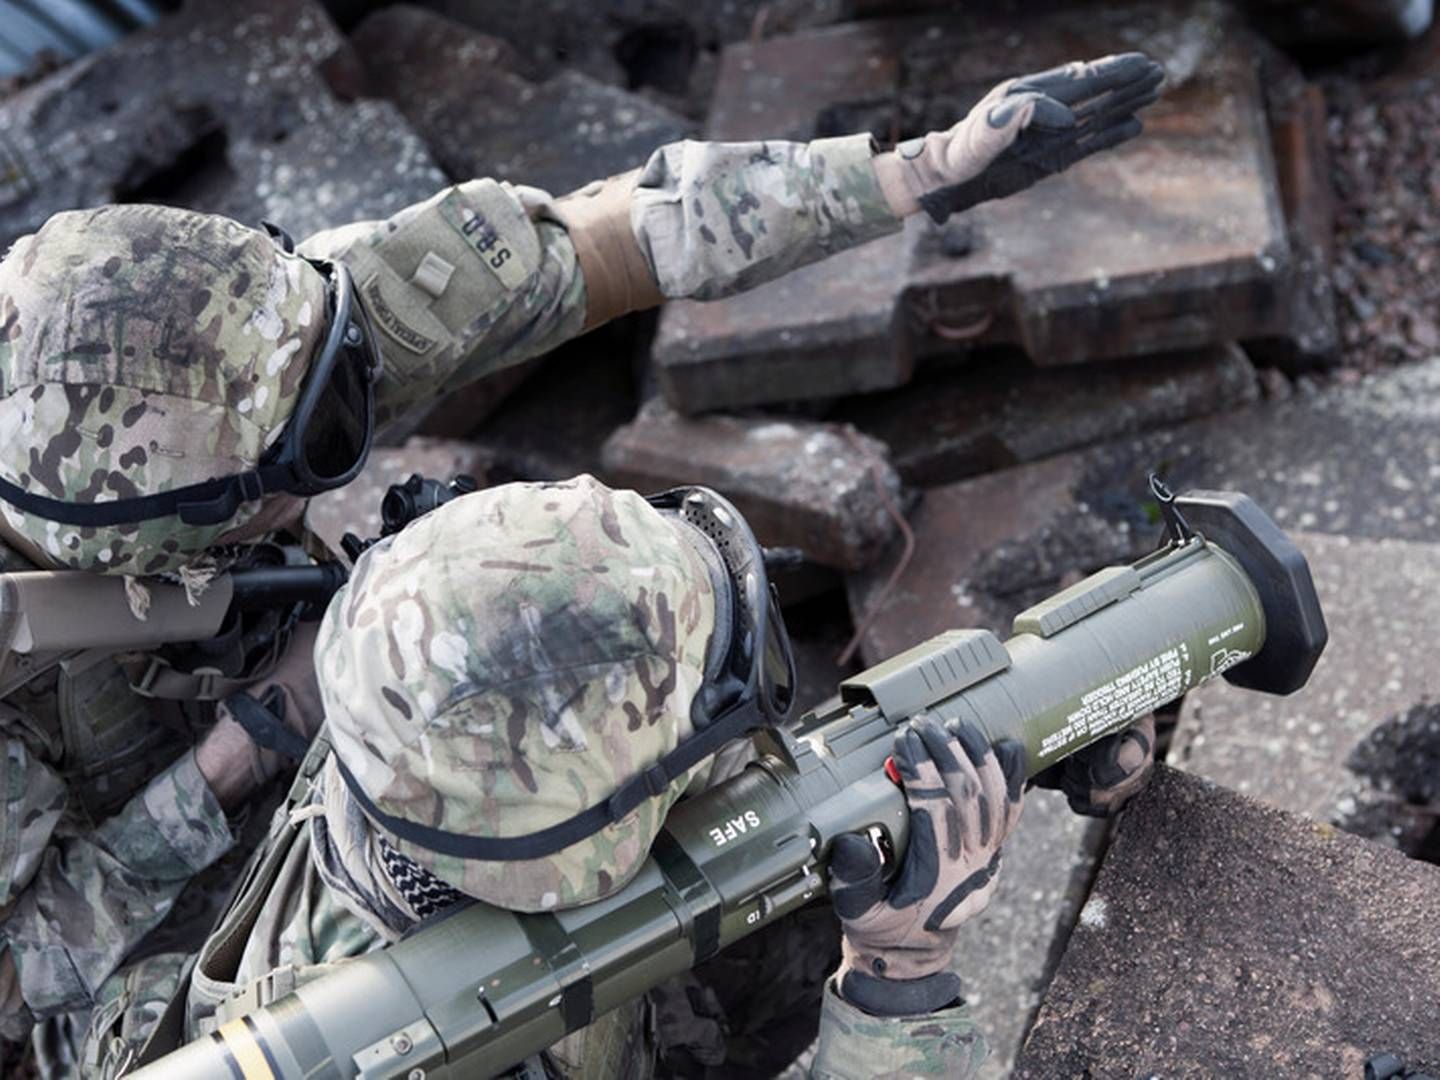 More than half of Sweden's major fund managers have no qualms about investing in arms. | Photo: Saab / Pr